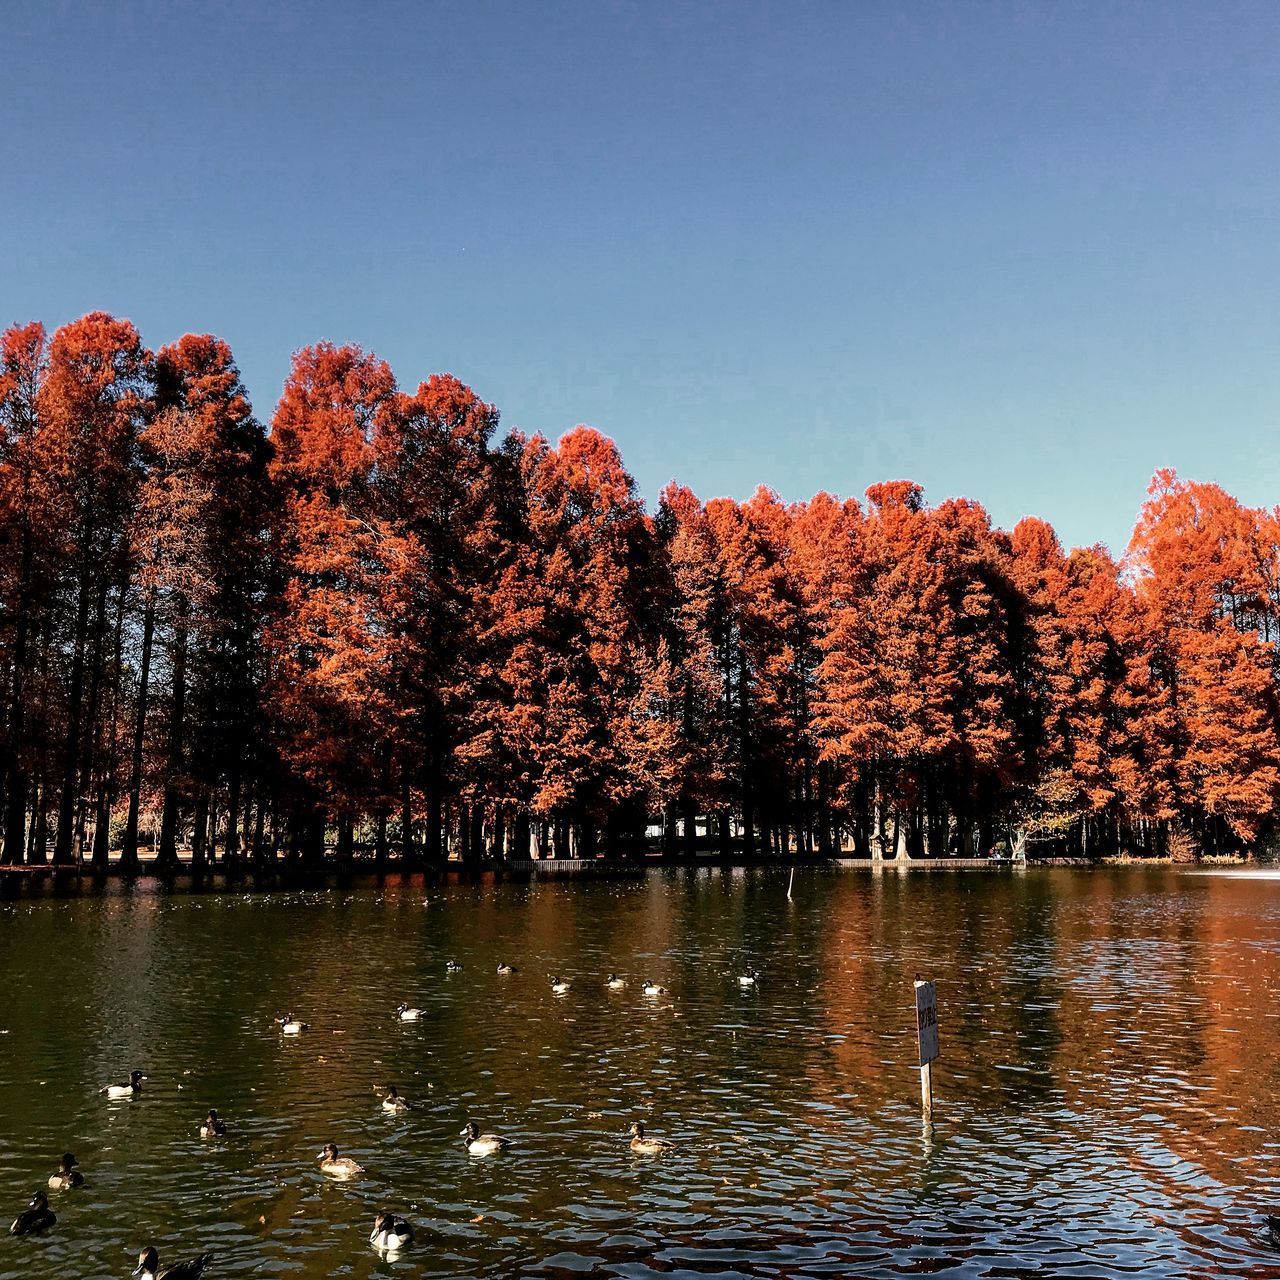 TREES BY LAKE AGAINST SKY DURING AUTUMN